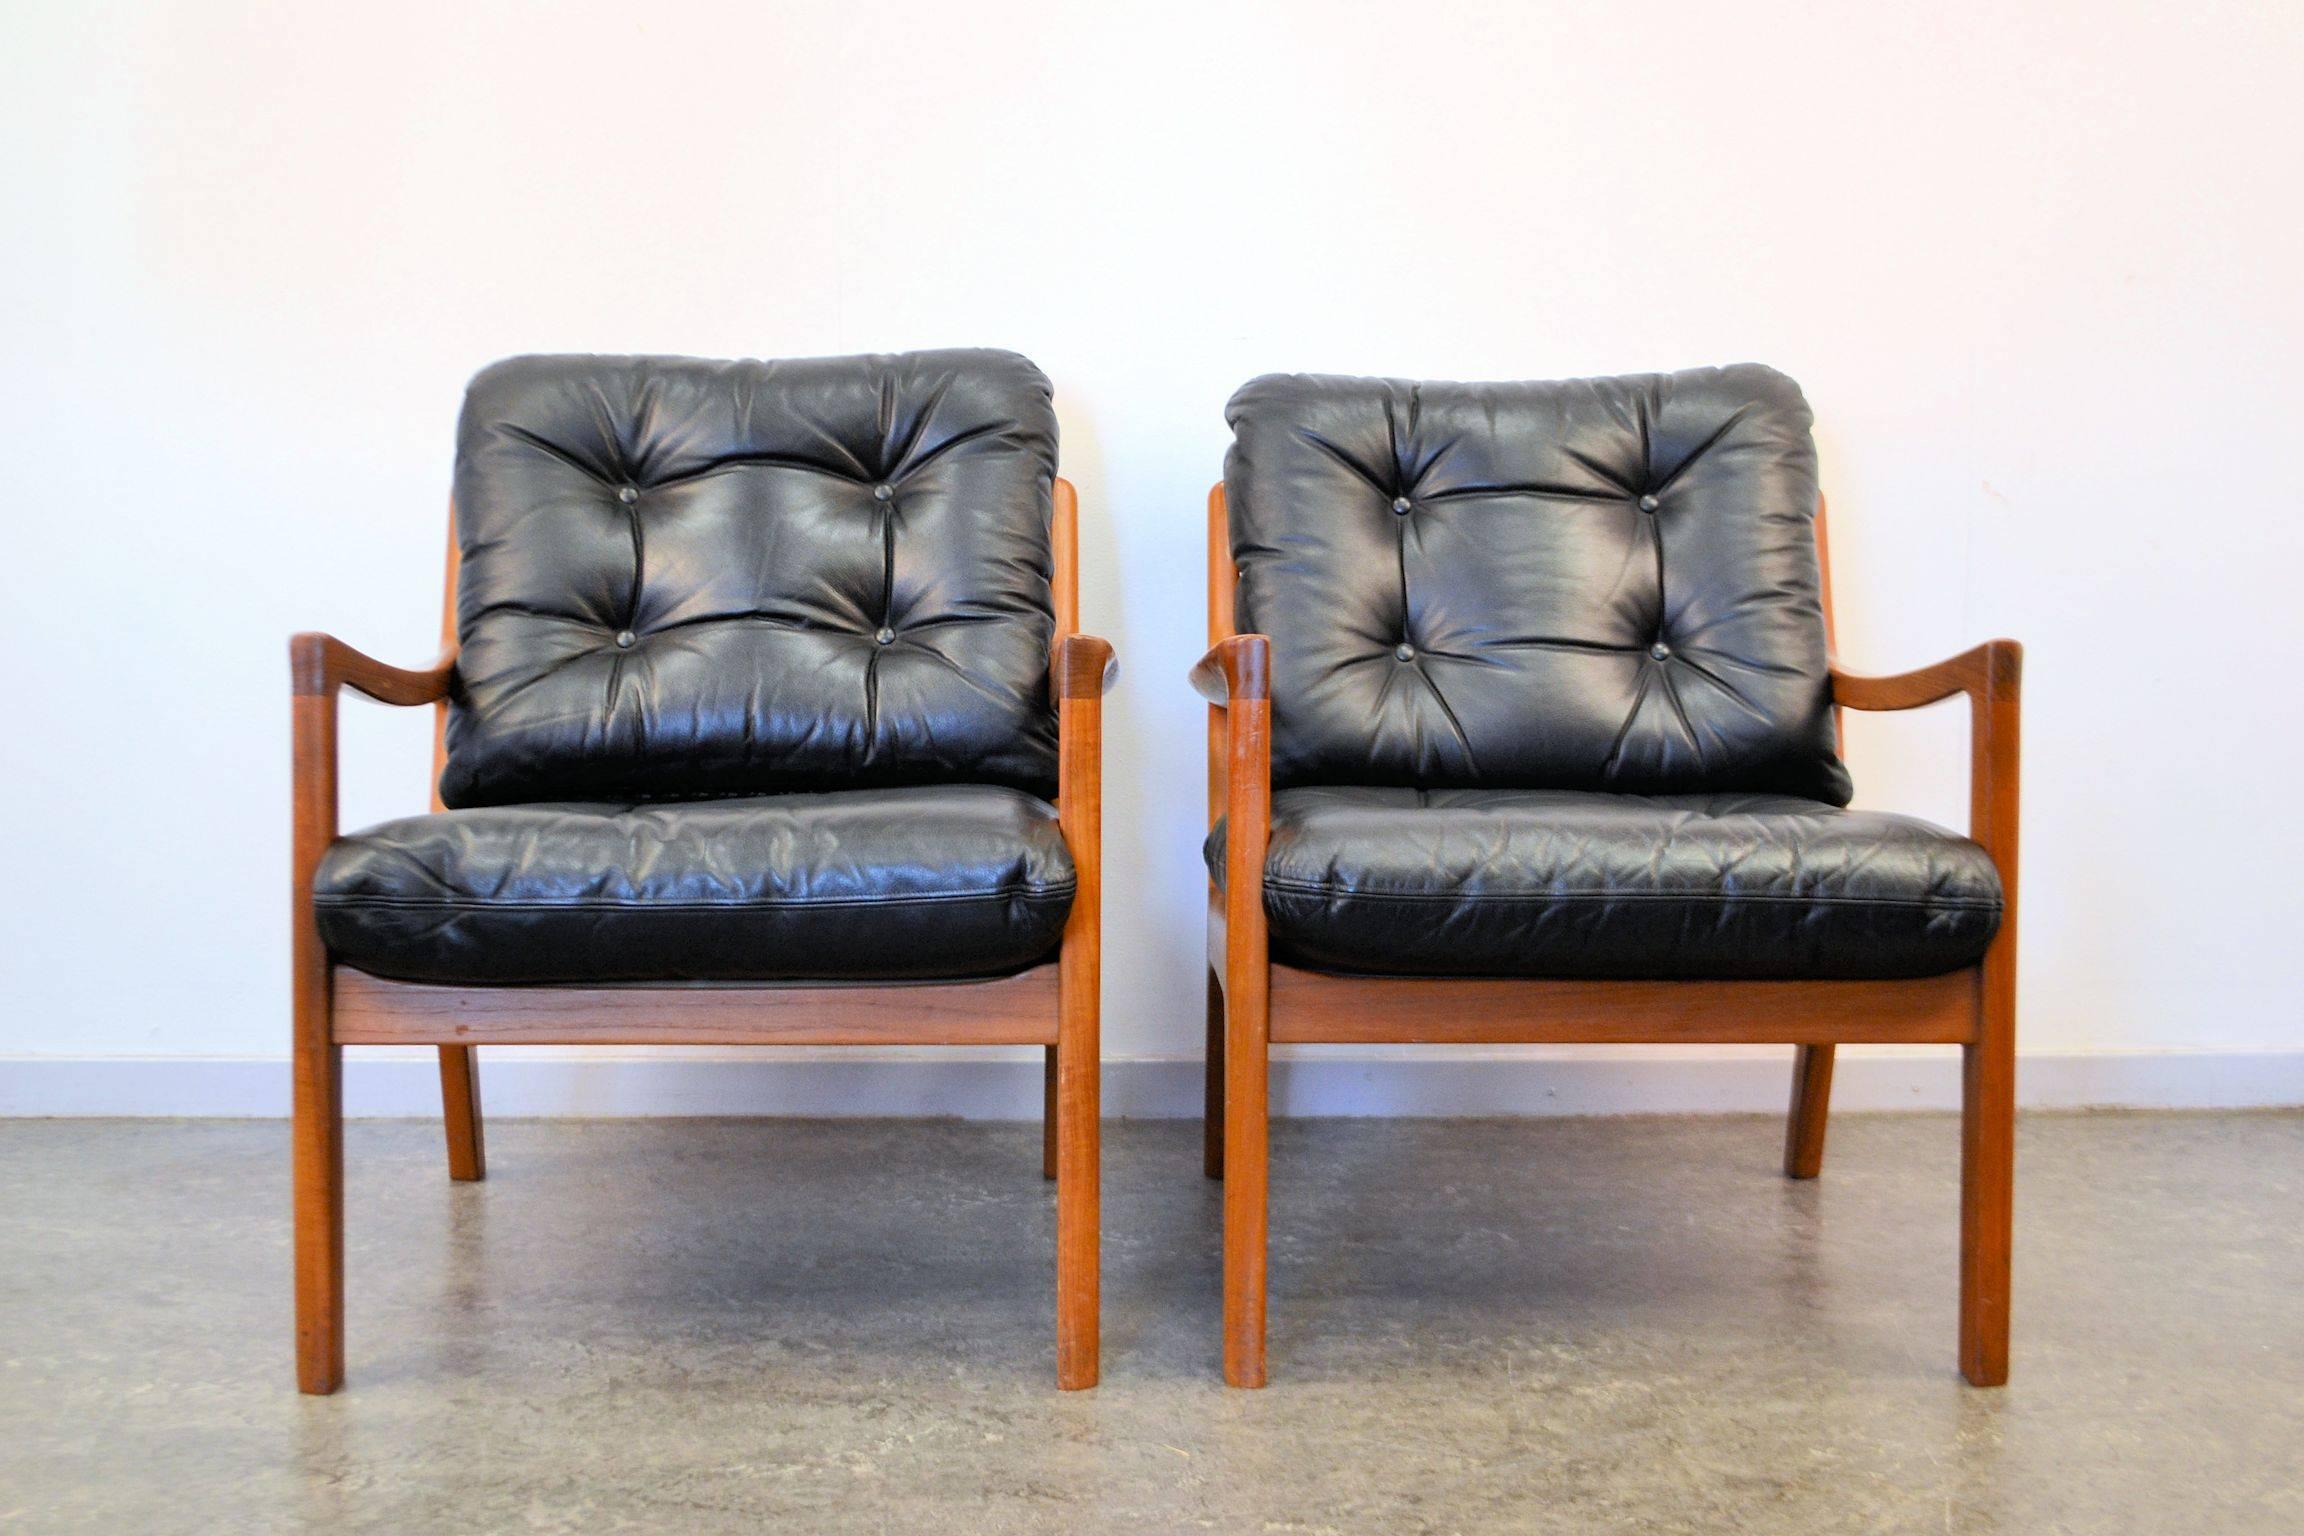 Set of two Danish modern easy chairs designed by Ole Wanscher for Danish manufacturer France & Son. These super comfortable chairs feature solid teak frames and padded black leather upholstery on loose back and seat cushions. Super stylish in both